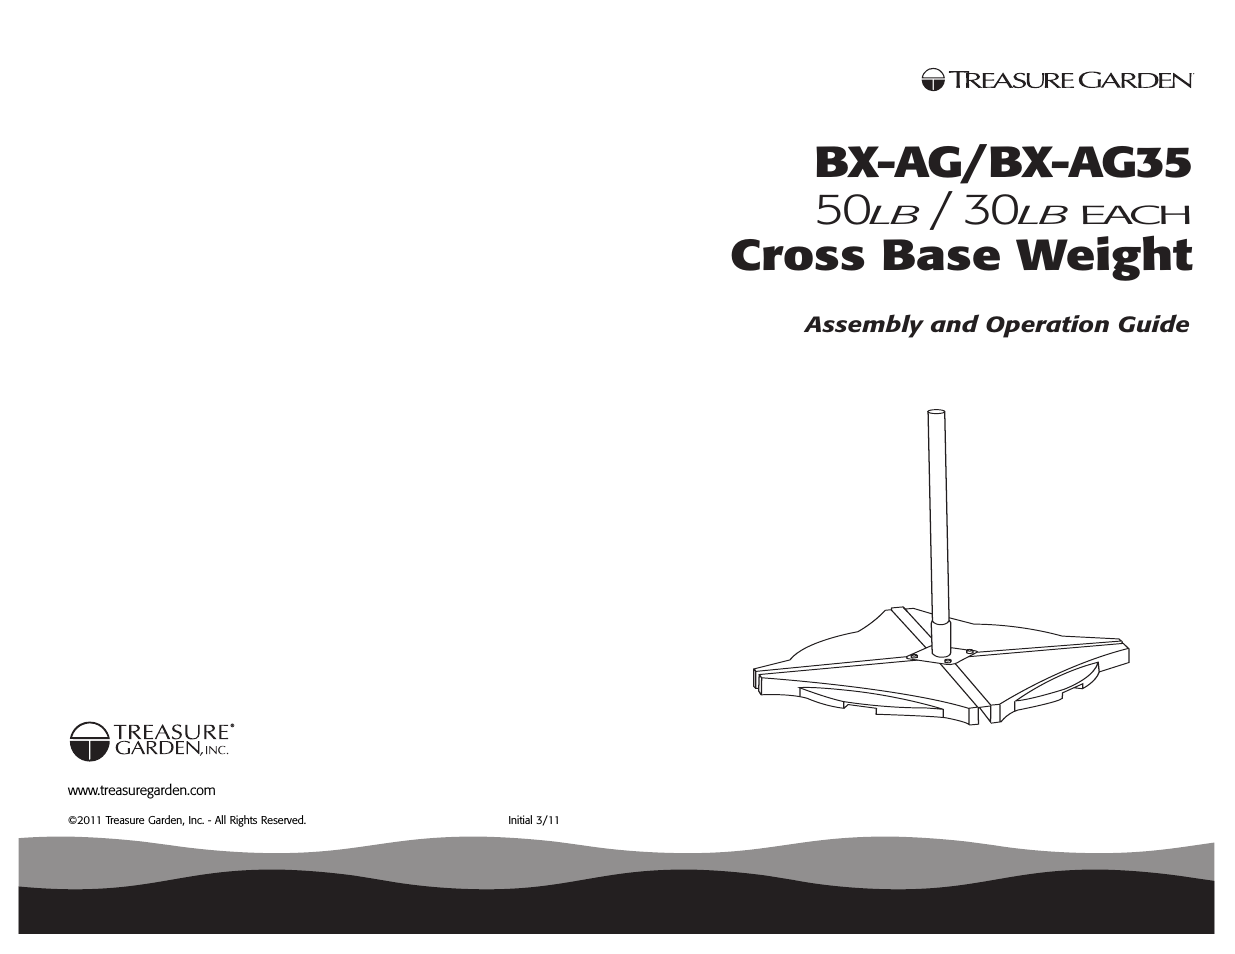 BX-AG Cross Base Weights